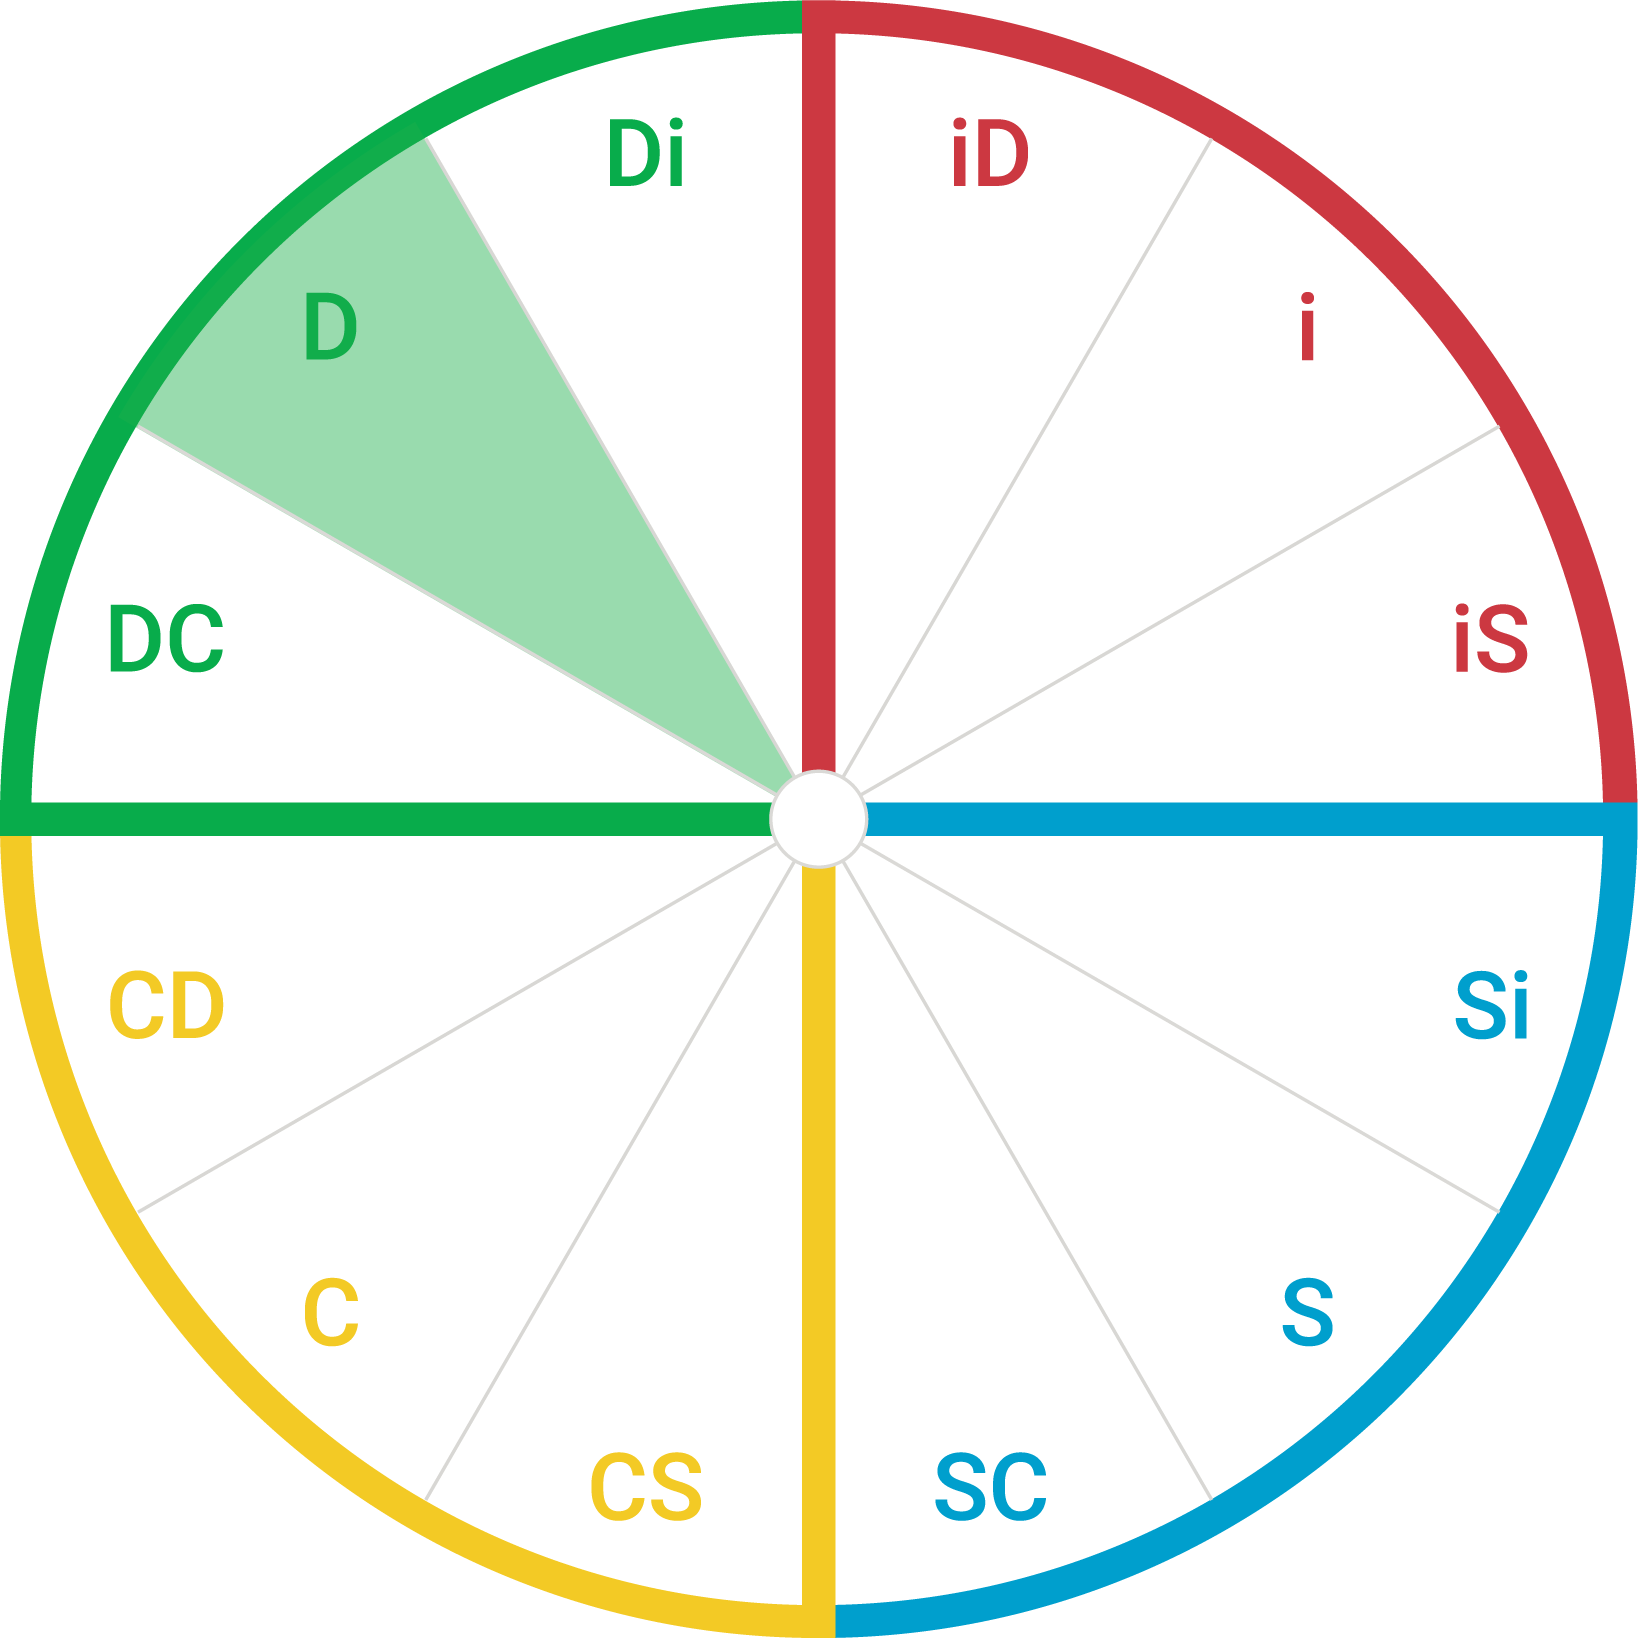 DiSC map showing the D style